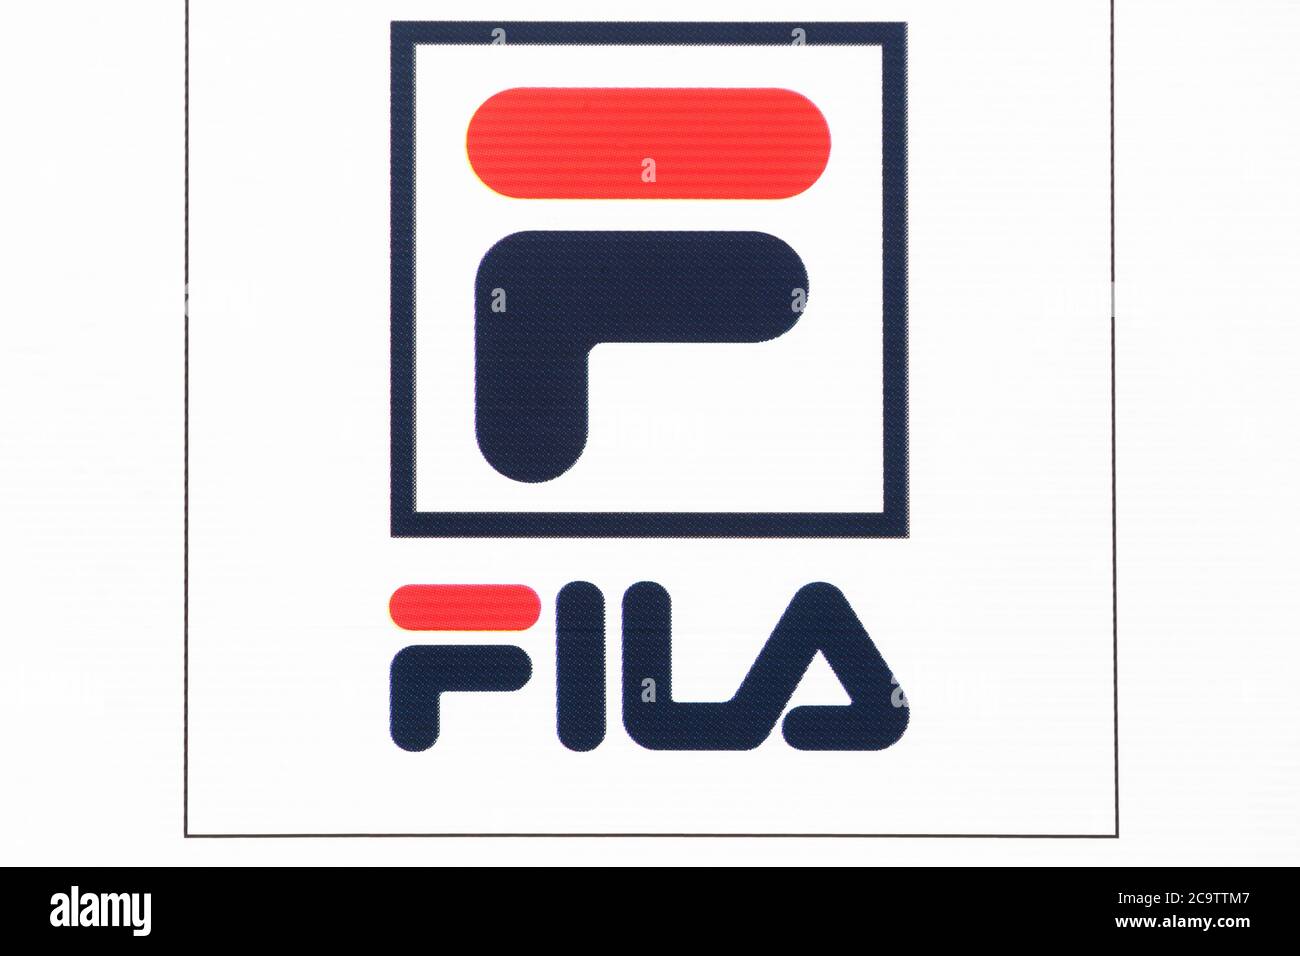 Villefranche, France - March 8, 2020: Fila logo on a wall. Fila is a  sportswear manufacturer that designs shoes and apparel Stock Photo - Alamy